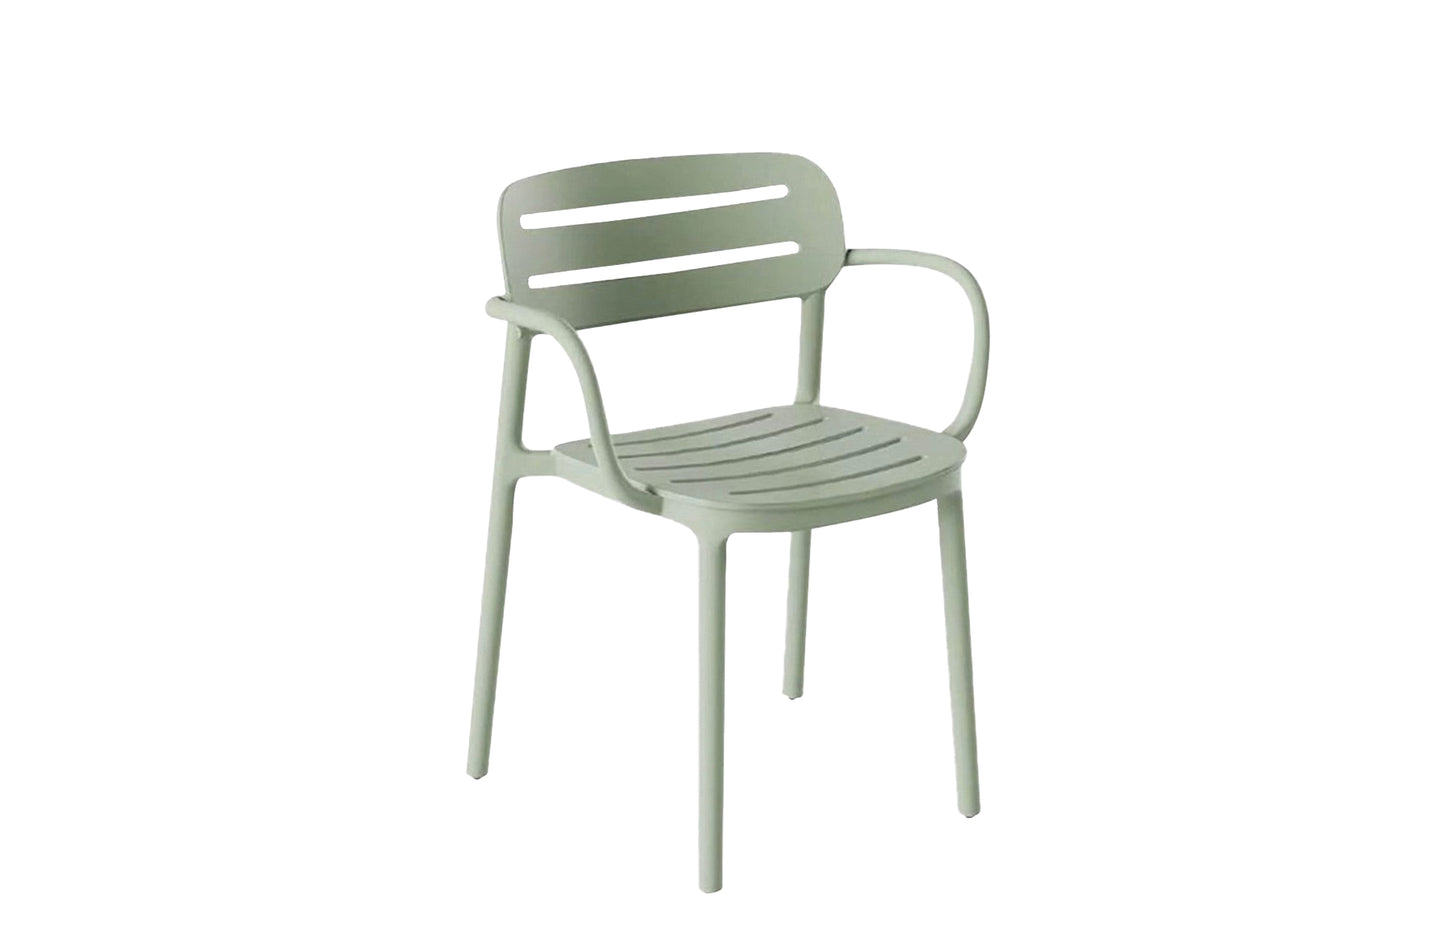 Croisette Chair with Arms
